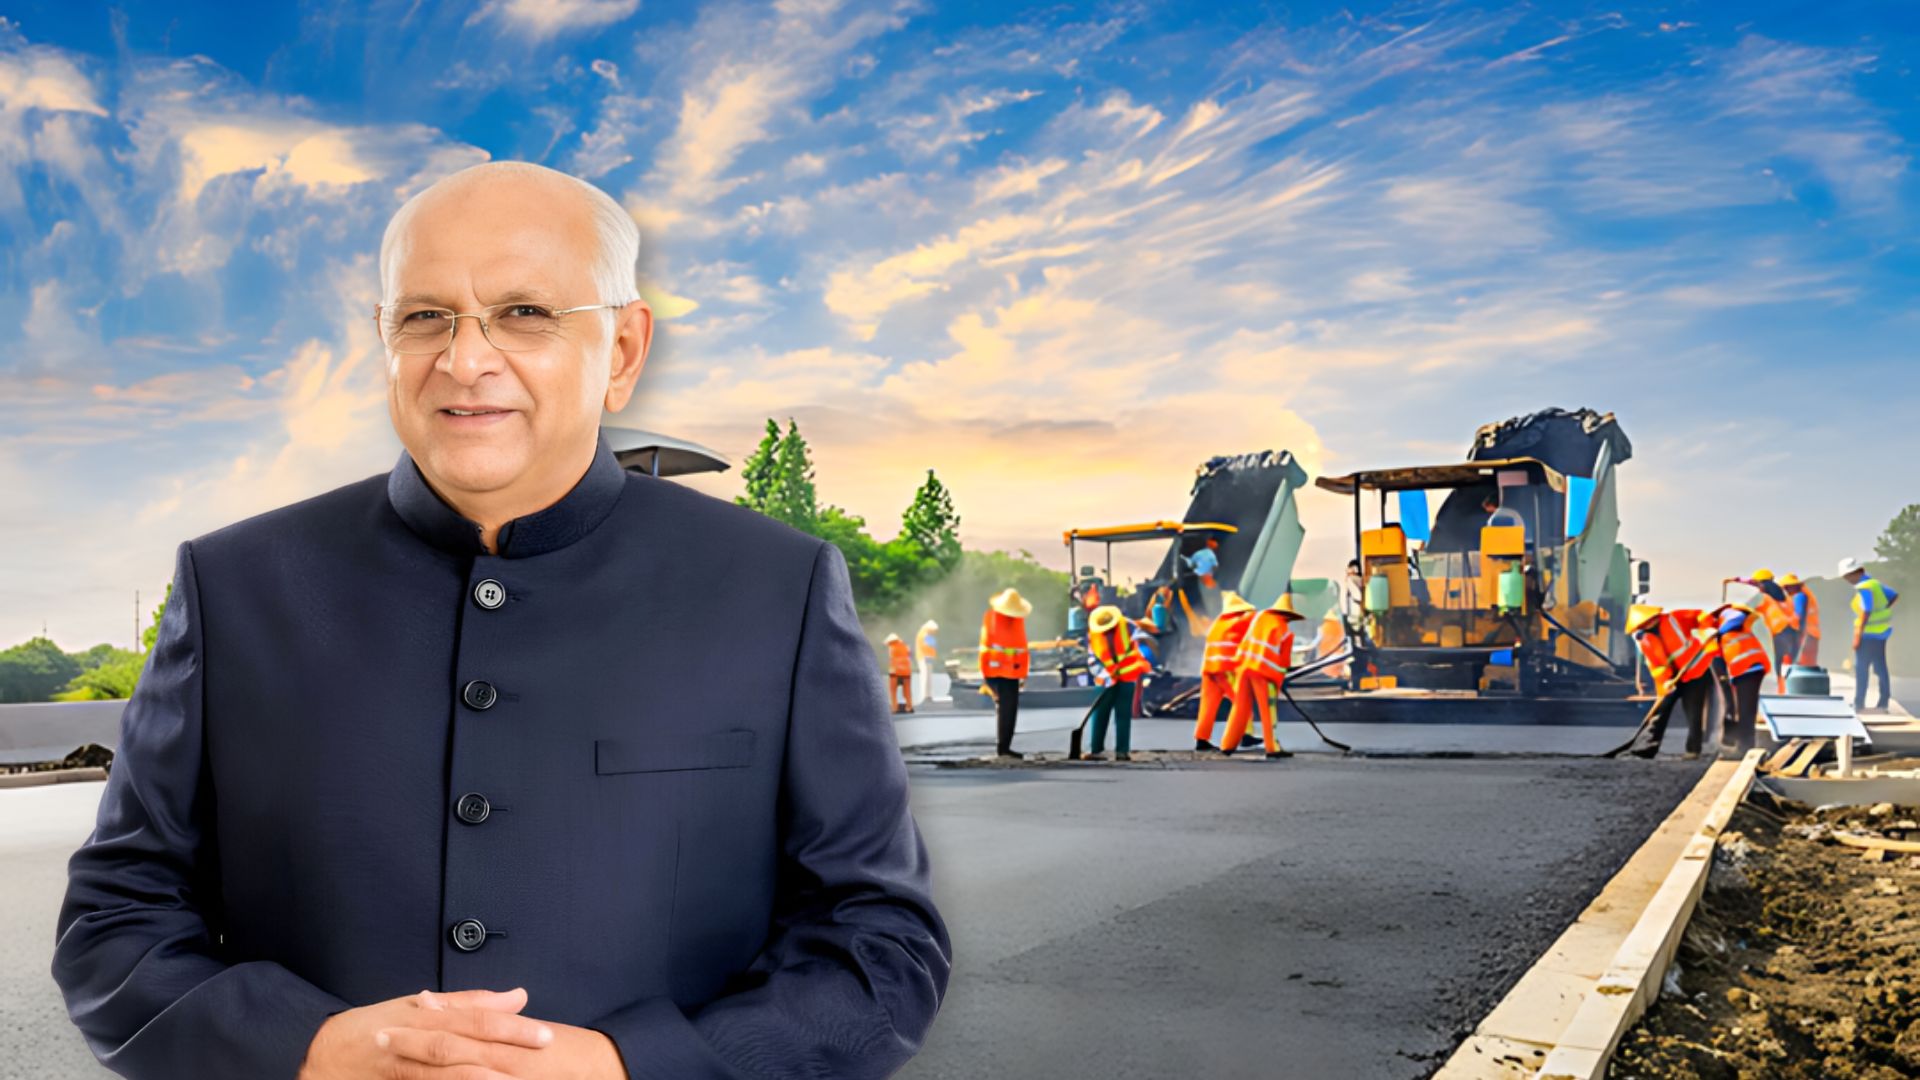 Gujarat CM Sanctions Rs 1740 Crore to Improve Road Infrastructure in Industrial and Quarry Areas